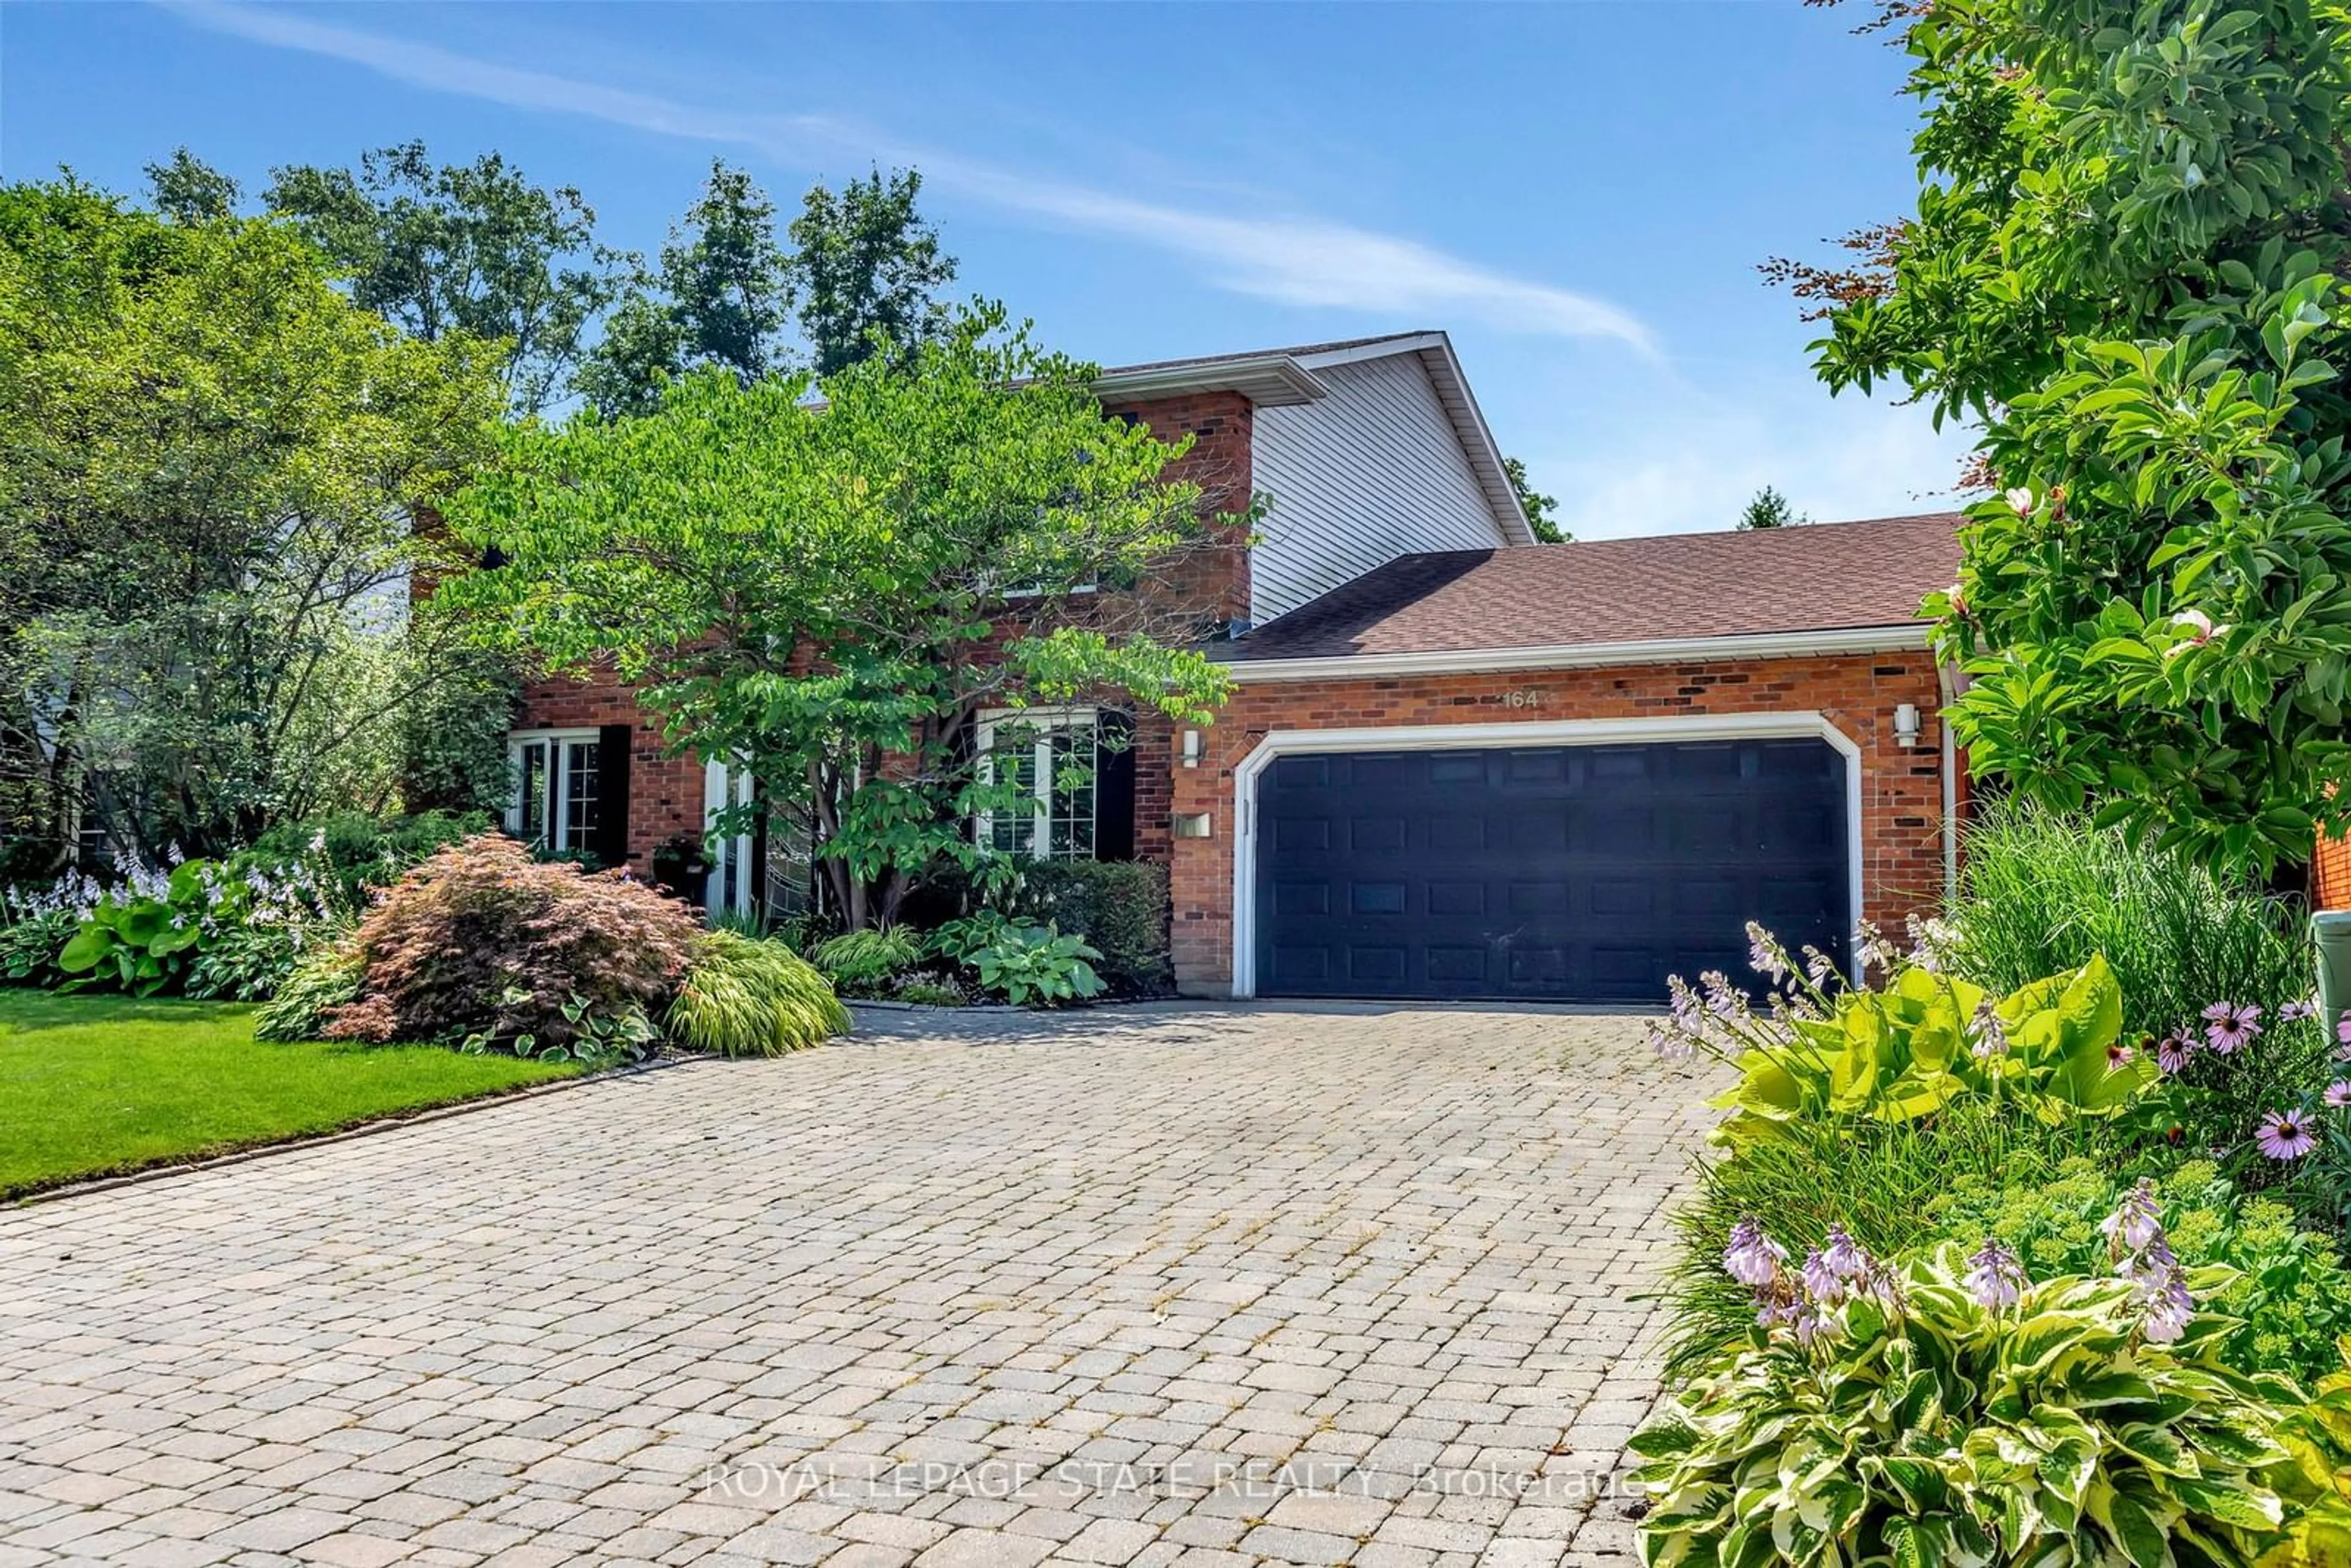 Home with brick exterior material for 164 Hostein Dr, Hamilton Ontario L9G 3W5